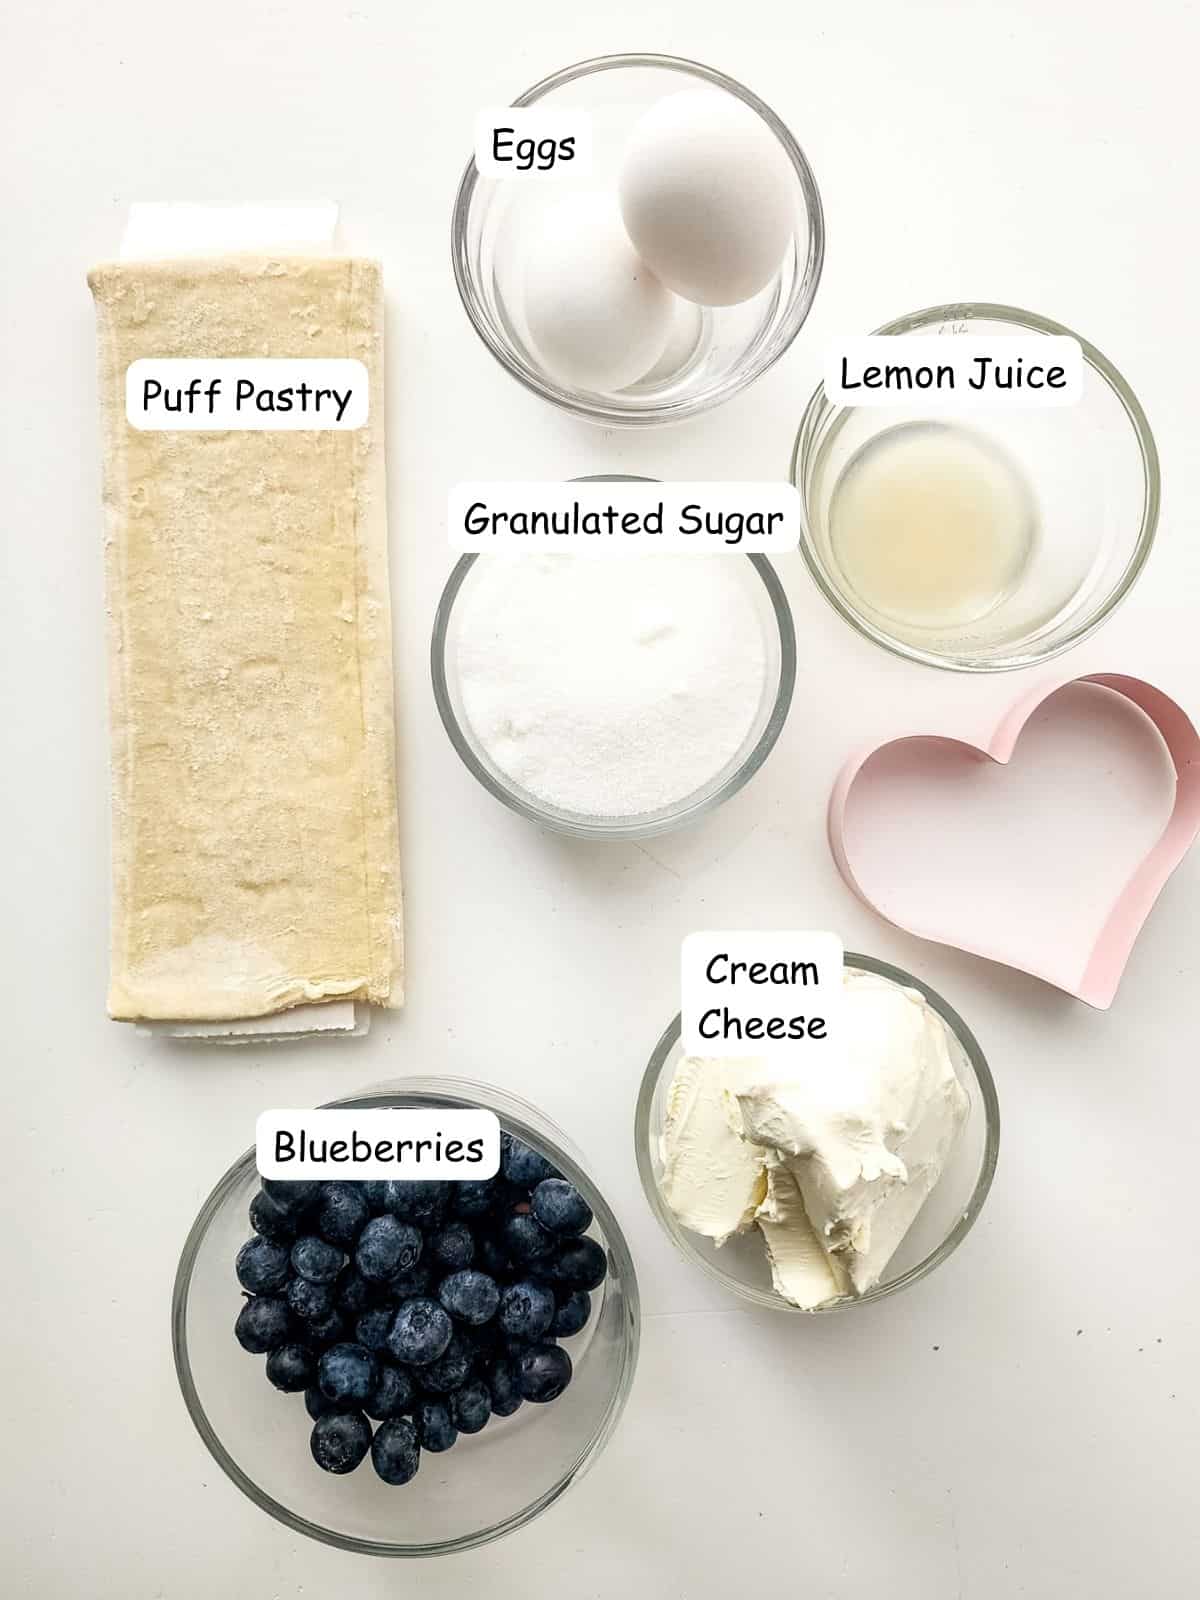 Ingredients for puff pastry Danish with blueberries.